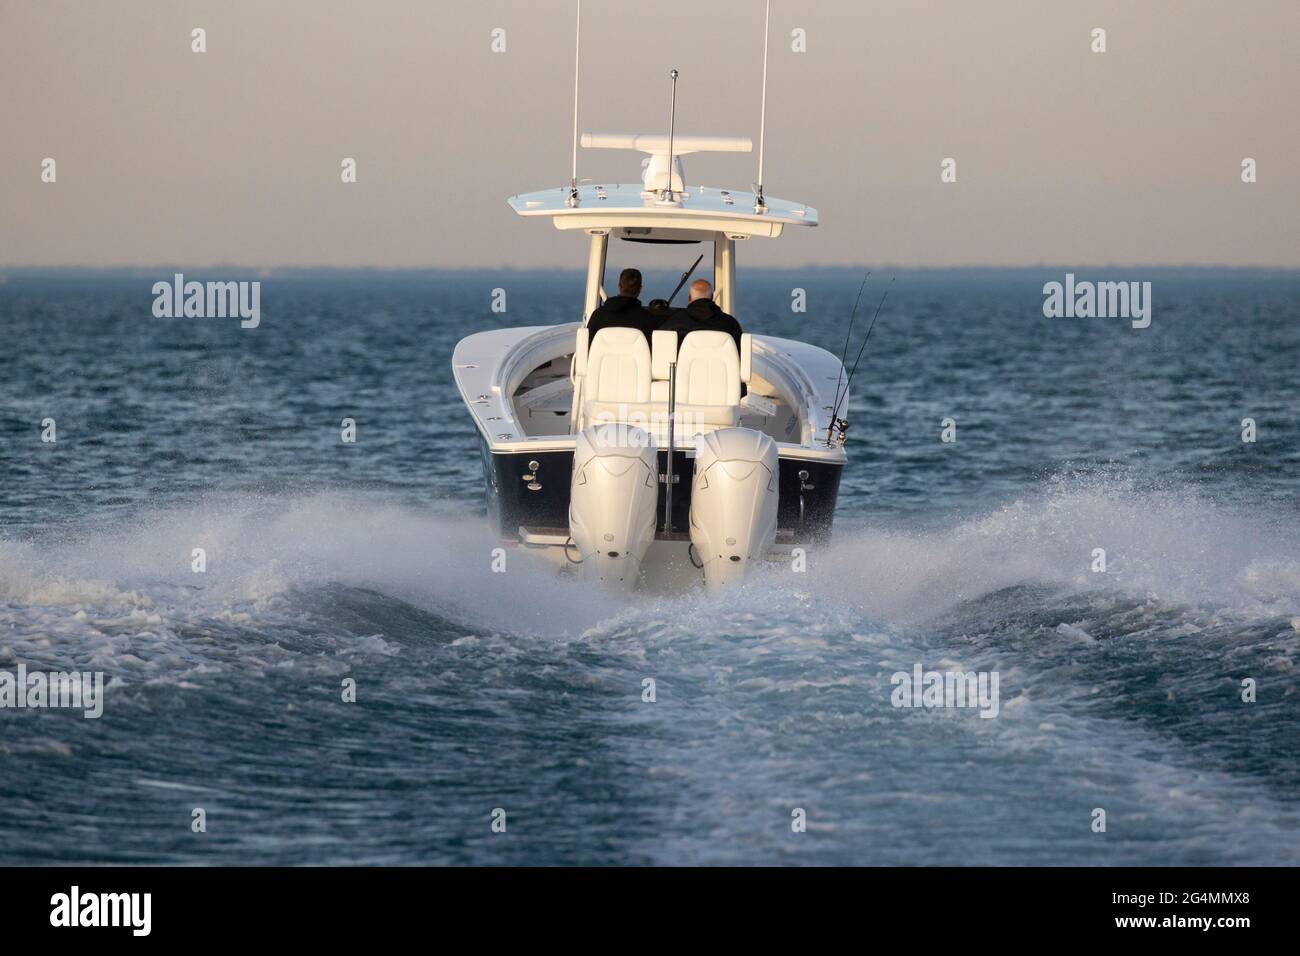 A center console boat speeding away on an empty lake. Stock Photo